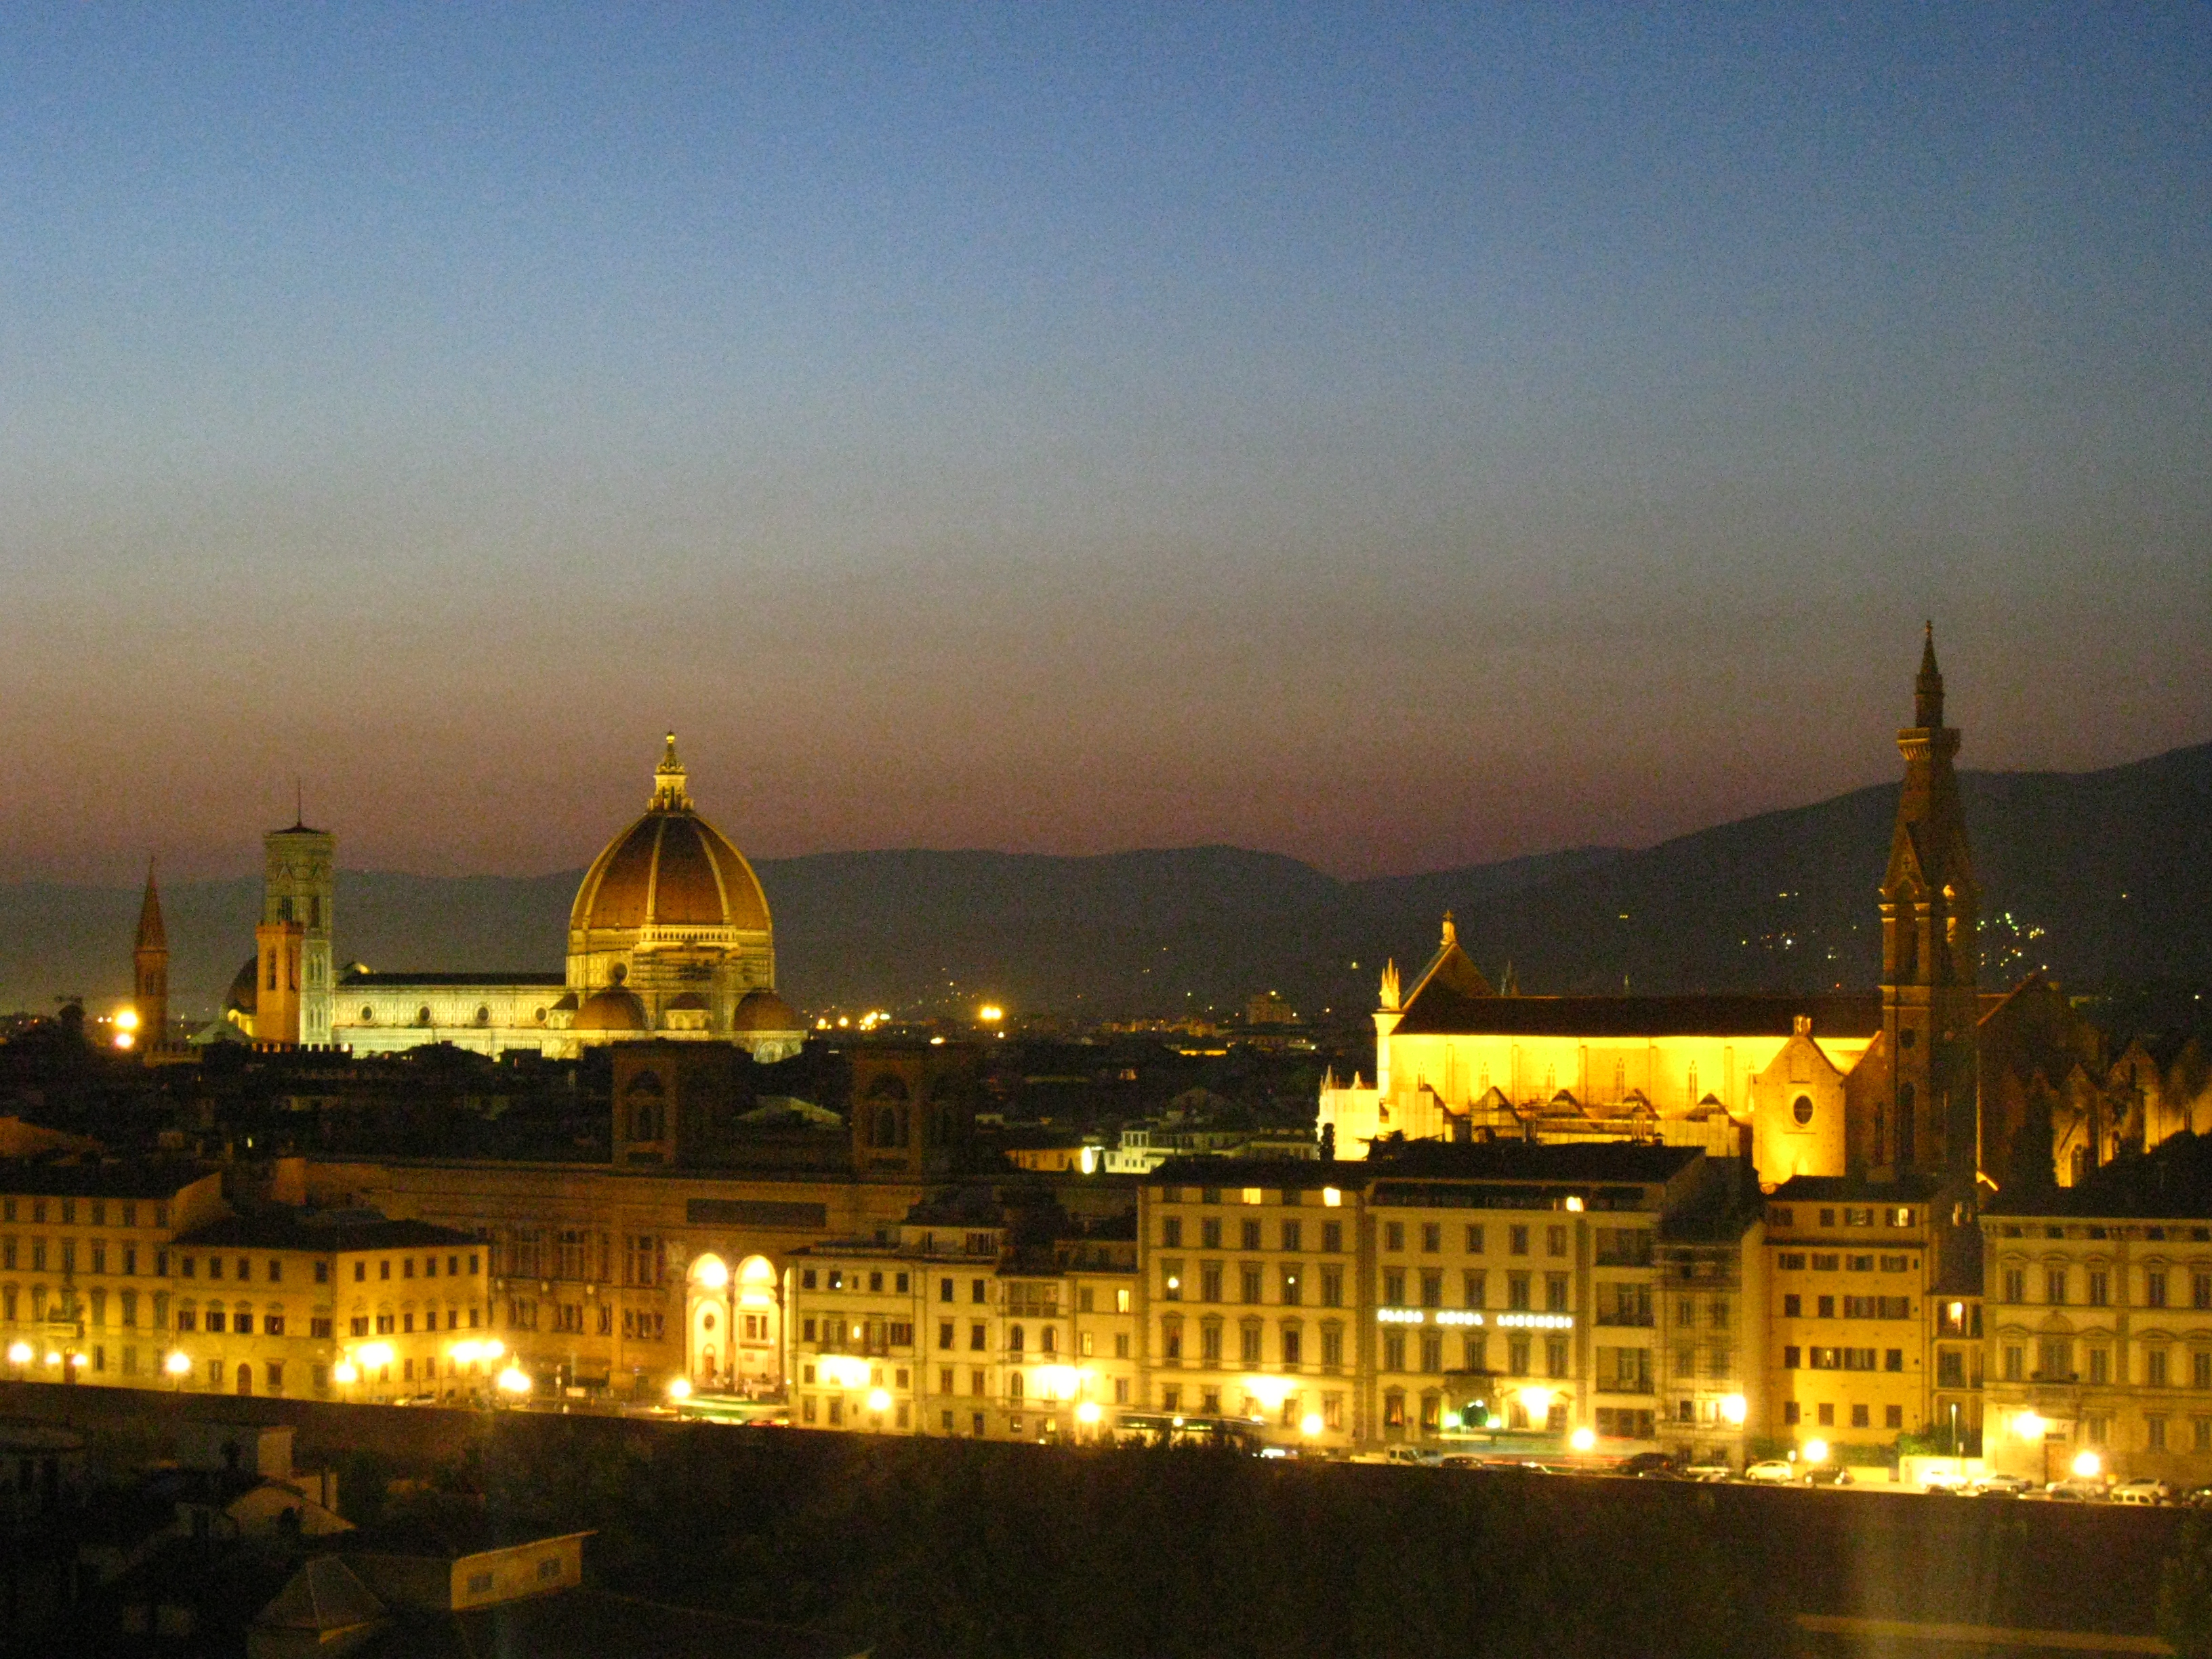 The Duomo and Santa Croce Church in Florence Italy from Piazzale Michelangelo